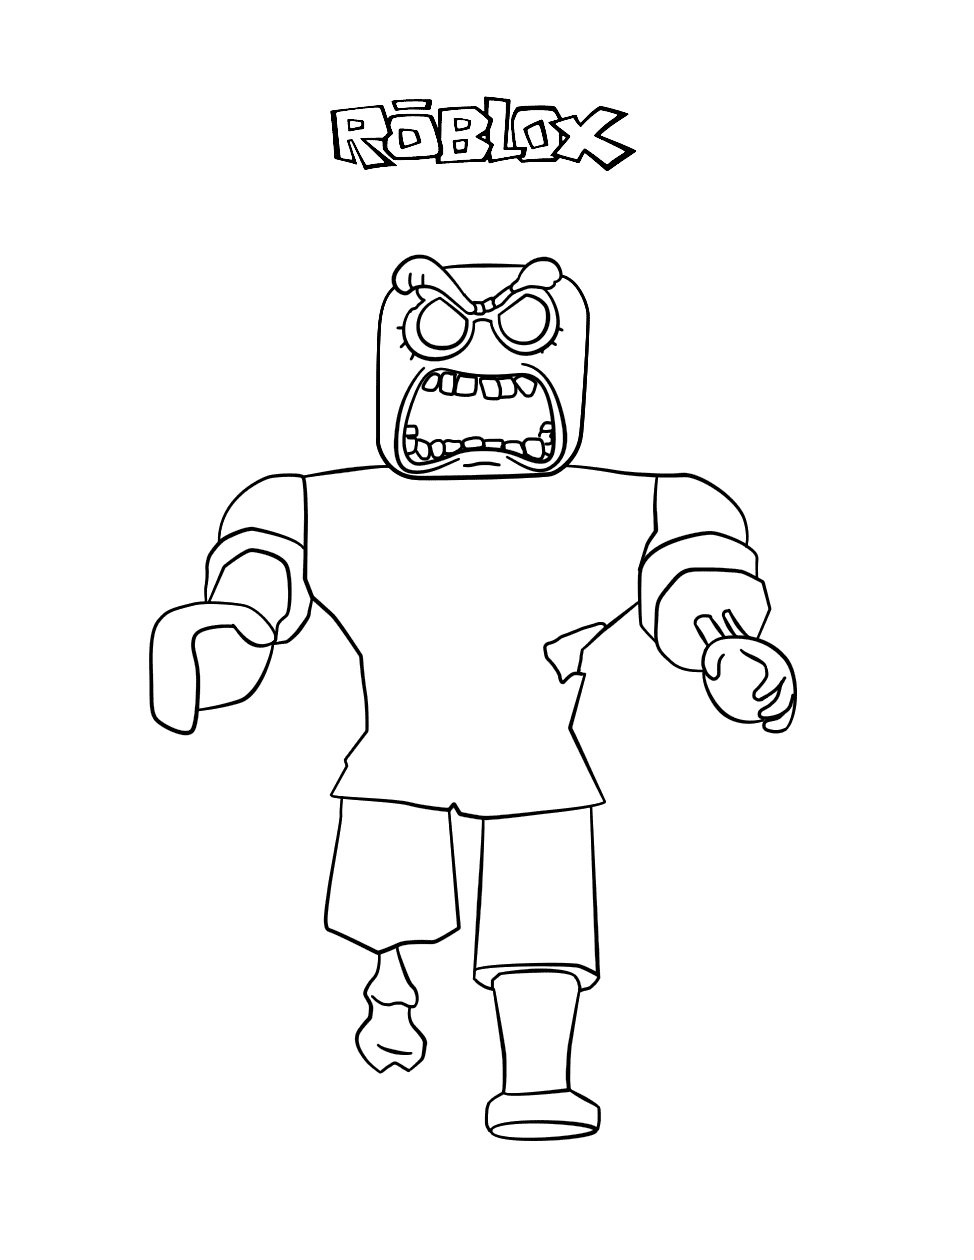 Roblox Zombie Coloring Pages & coloring book. 6000+ coloring pages.